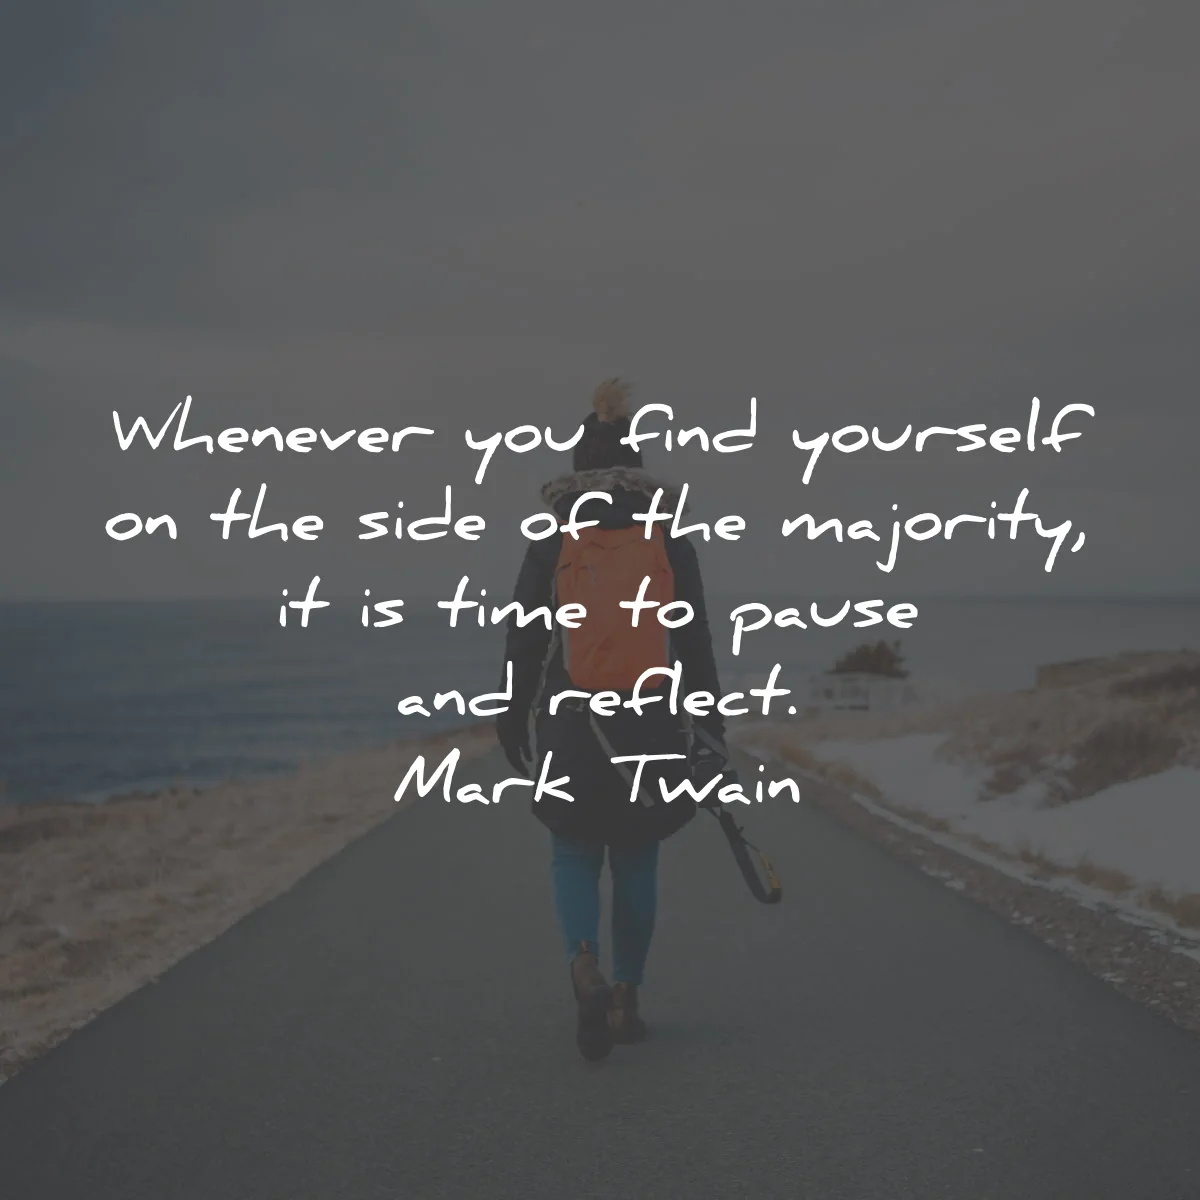 famous quotes whenever find yourself majority time reflect mark twain wisdom